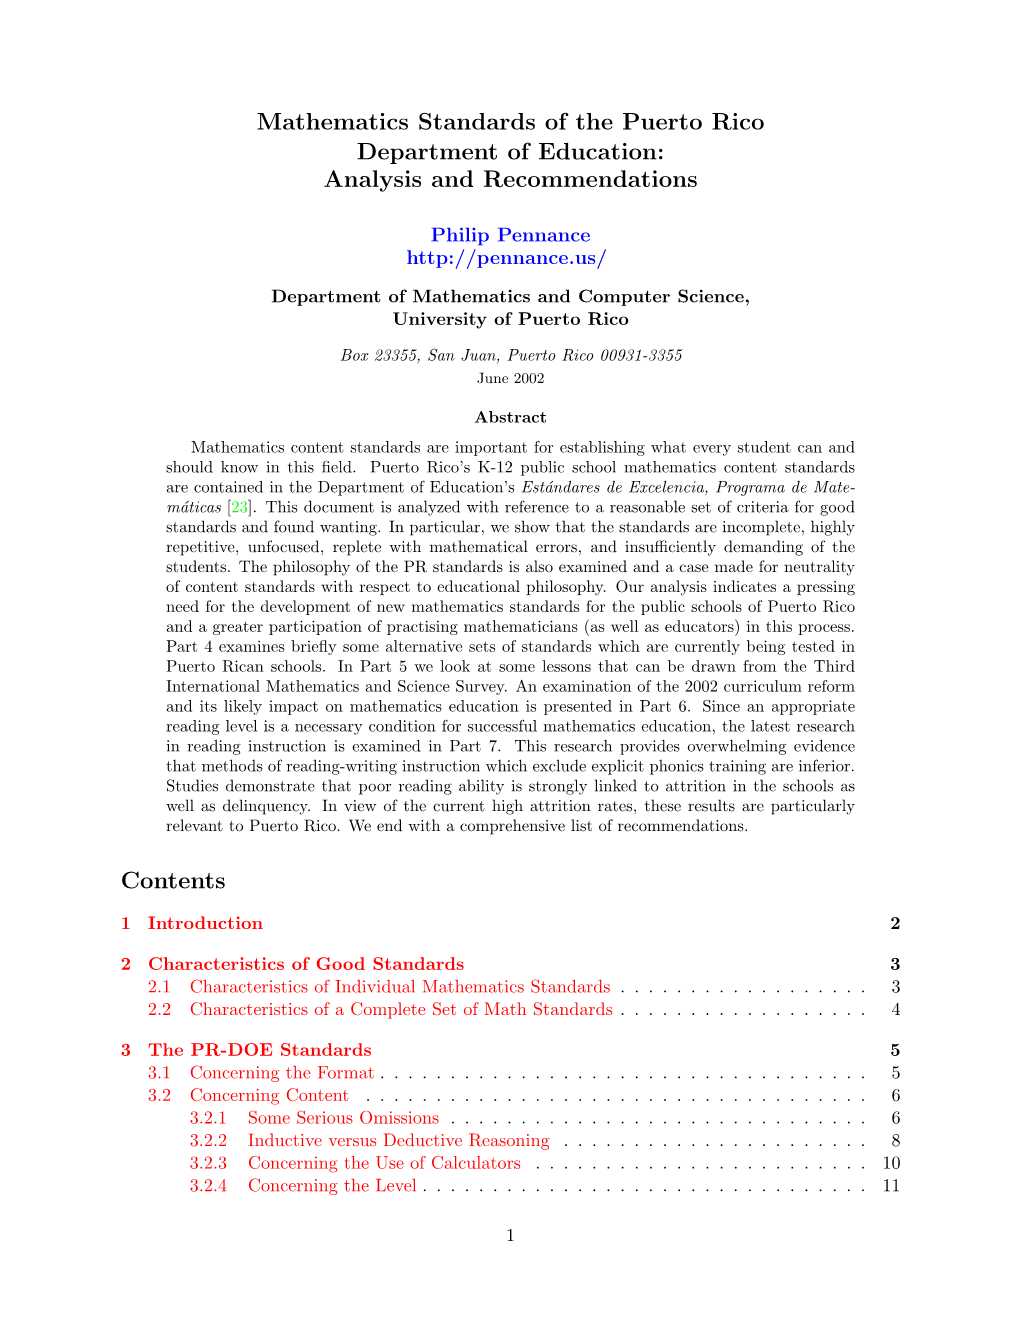 Mathematics Standards of the Puerto Rico Department of Education: Analysis and Recommendations Contents